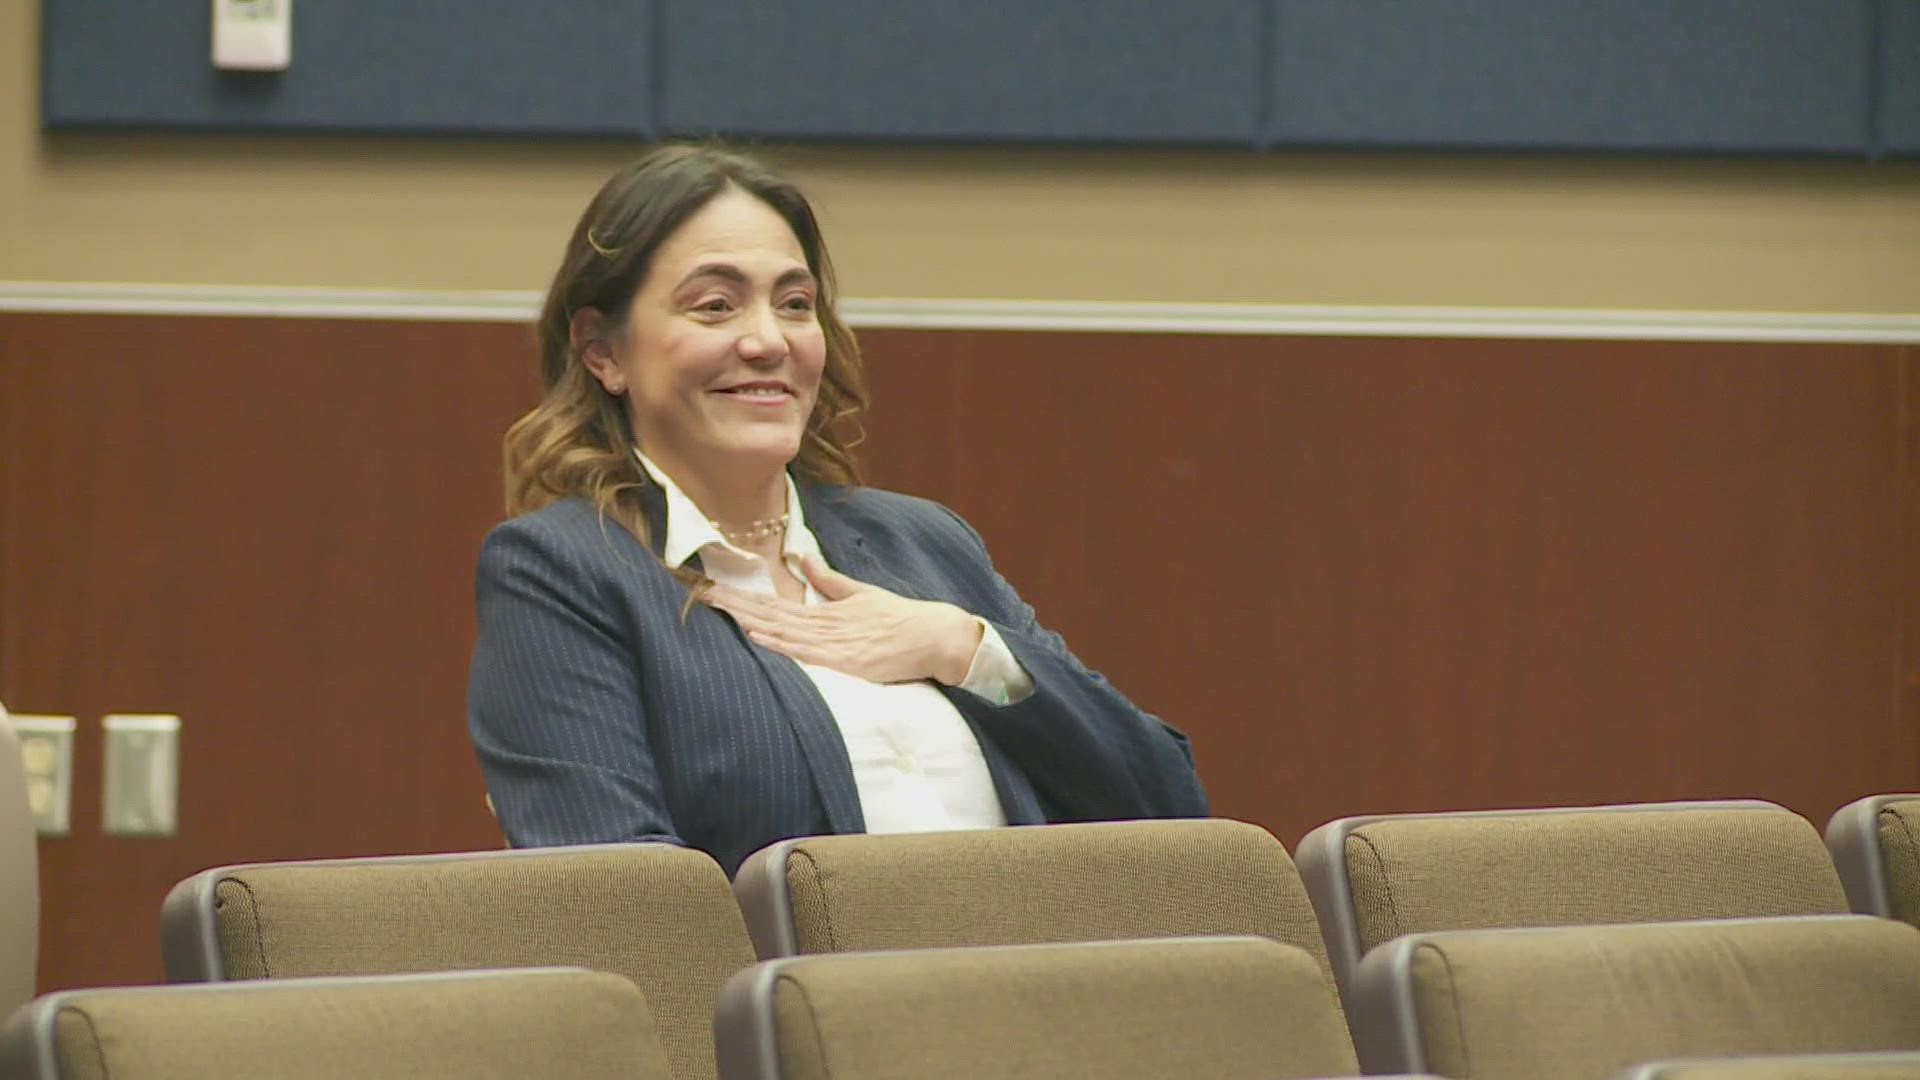 The Jefferson Parish School Board has filled a seat after one member stepped down. The new member is a former teacher.